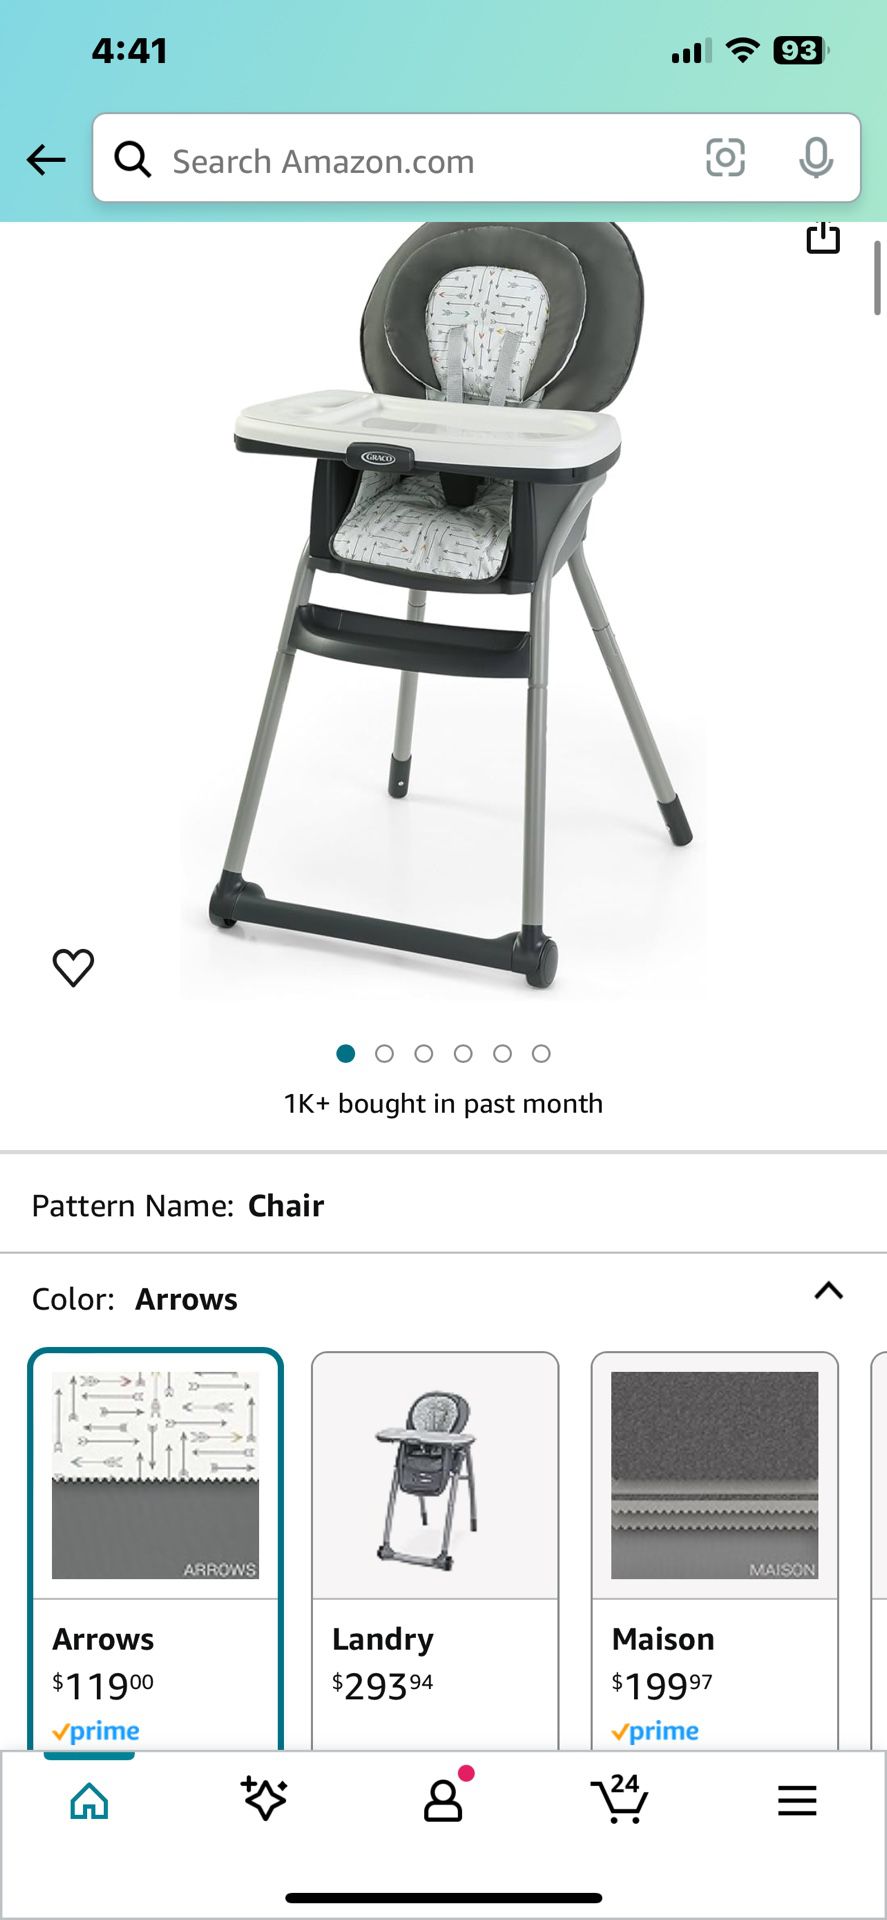 Graco Table2Table 6 In 1 High chair